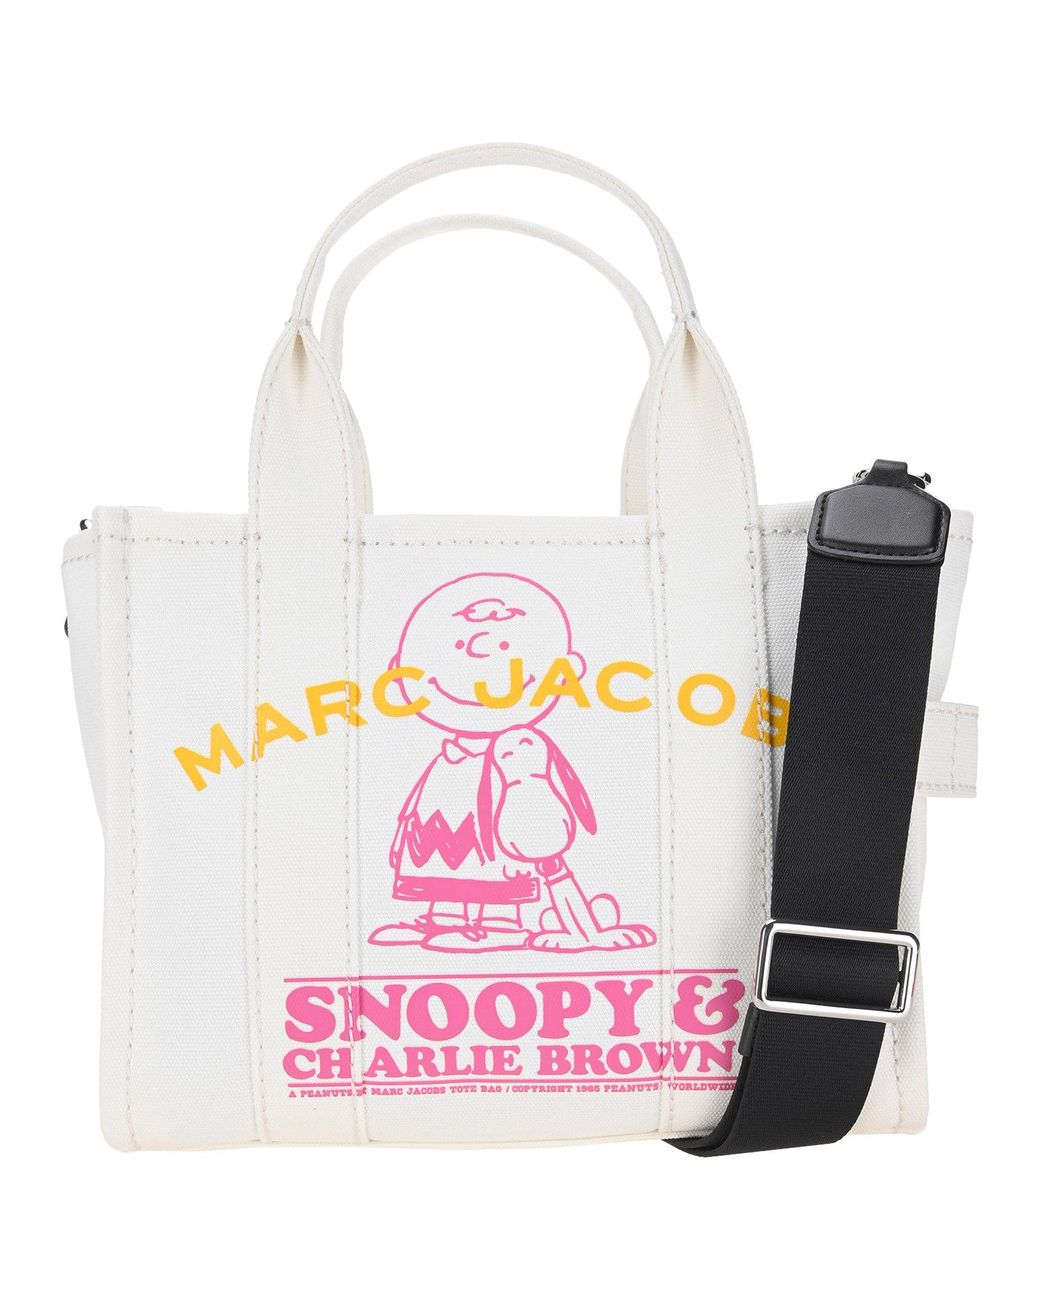 Marc Jacobs X Peanuts The Snoopy Mini Tote Bag in White